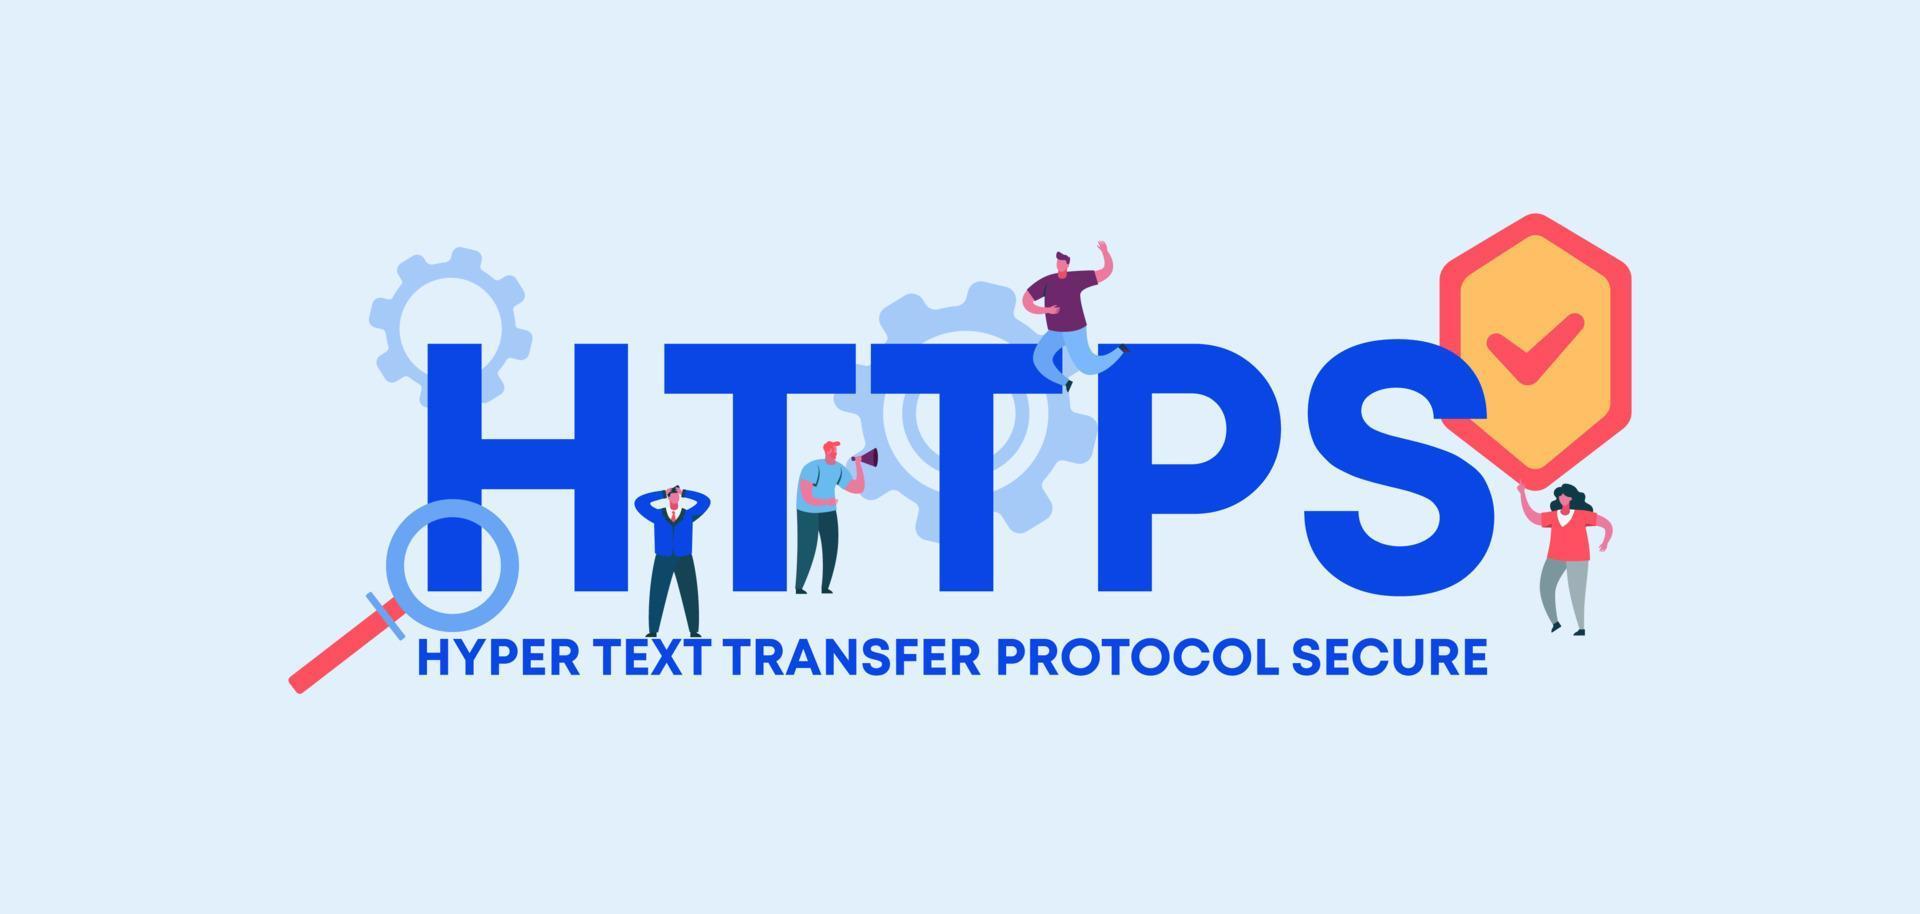 HTTPS hyper text transfer protocol secure. Coding and programming technologies and web software digital graphic. vector